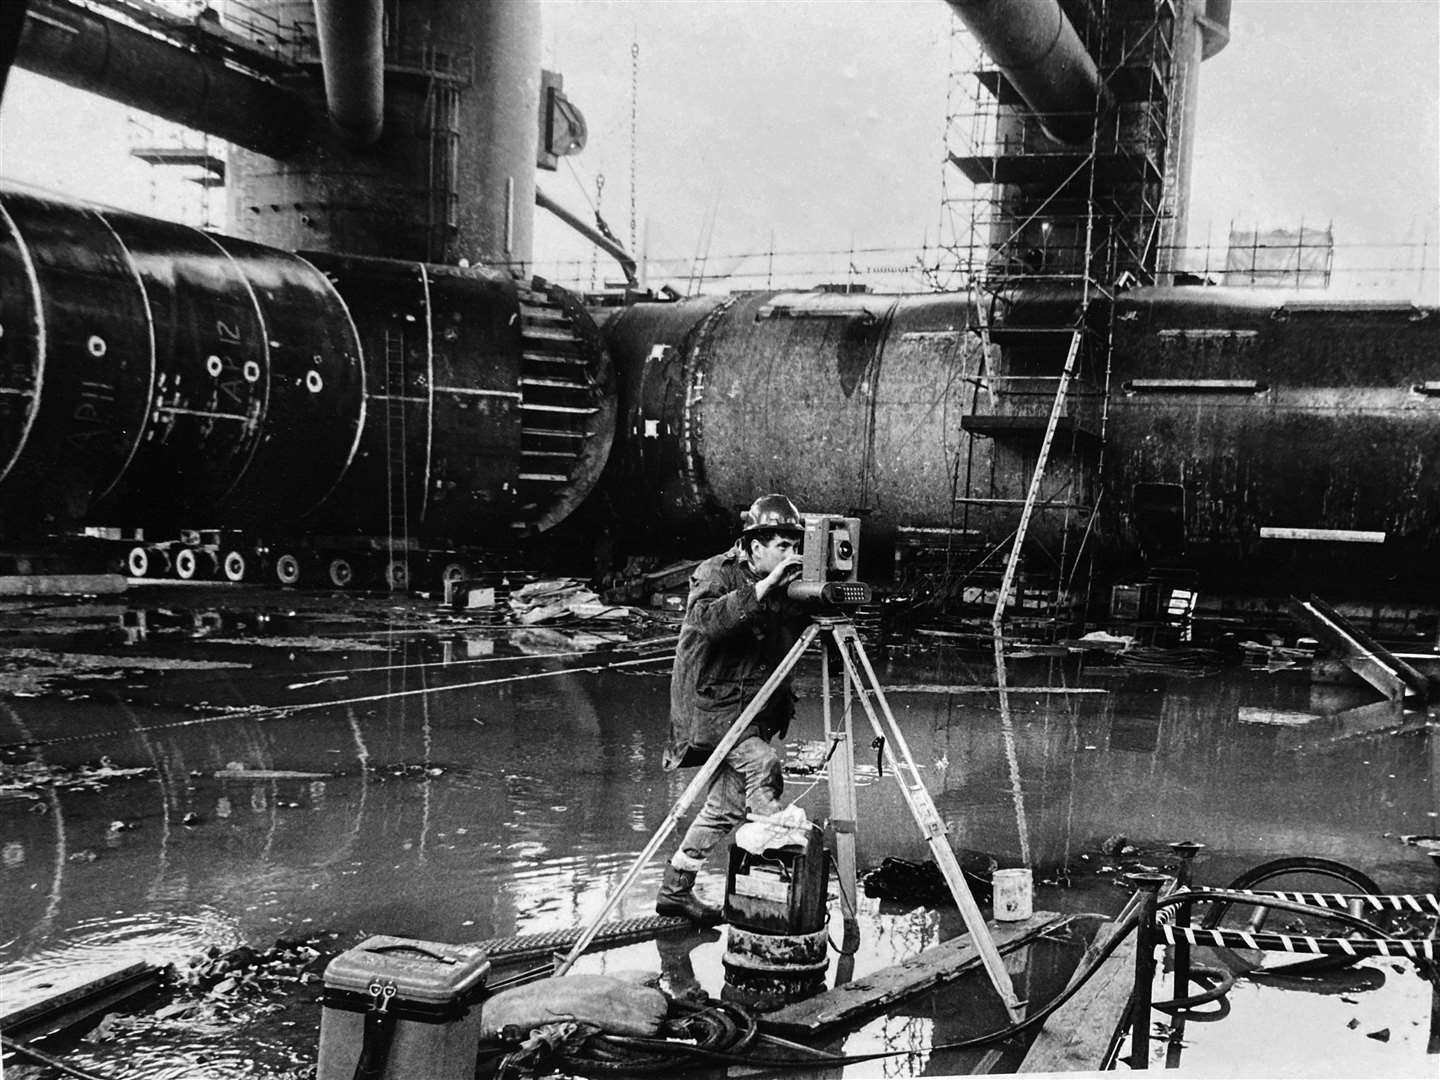 Photographer Craig Mackay in his younger years at Nigg. Picture: Scotch